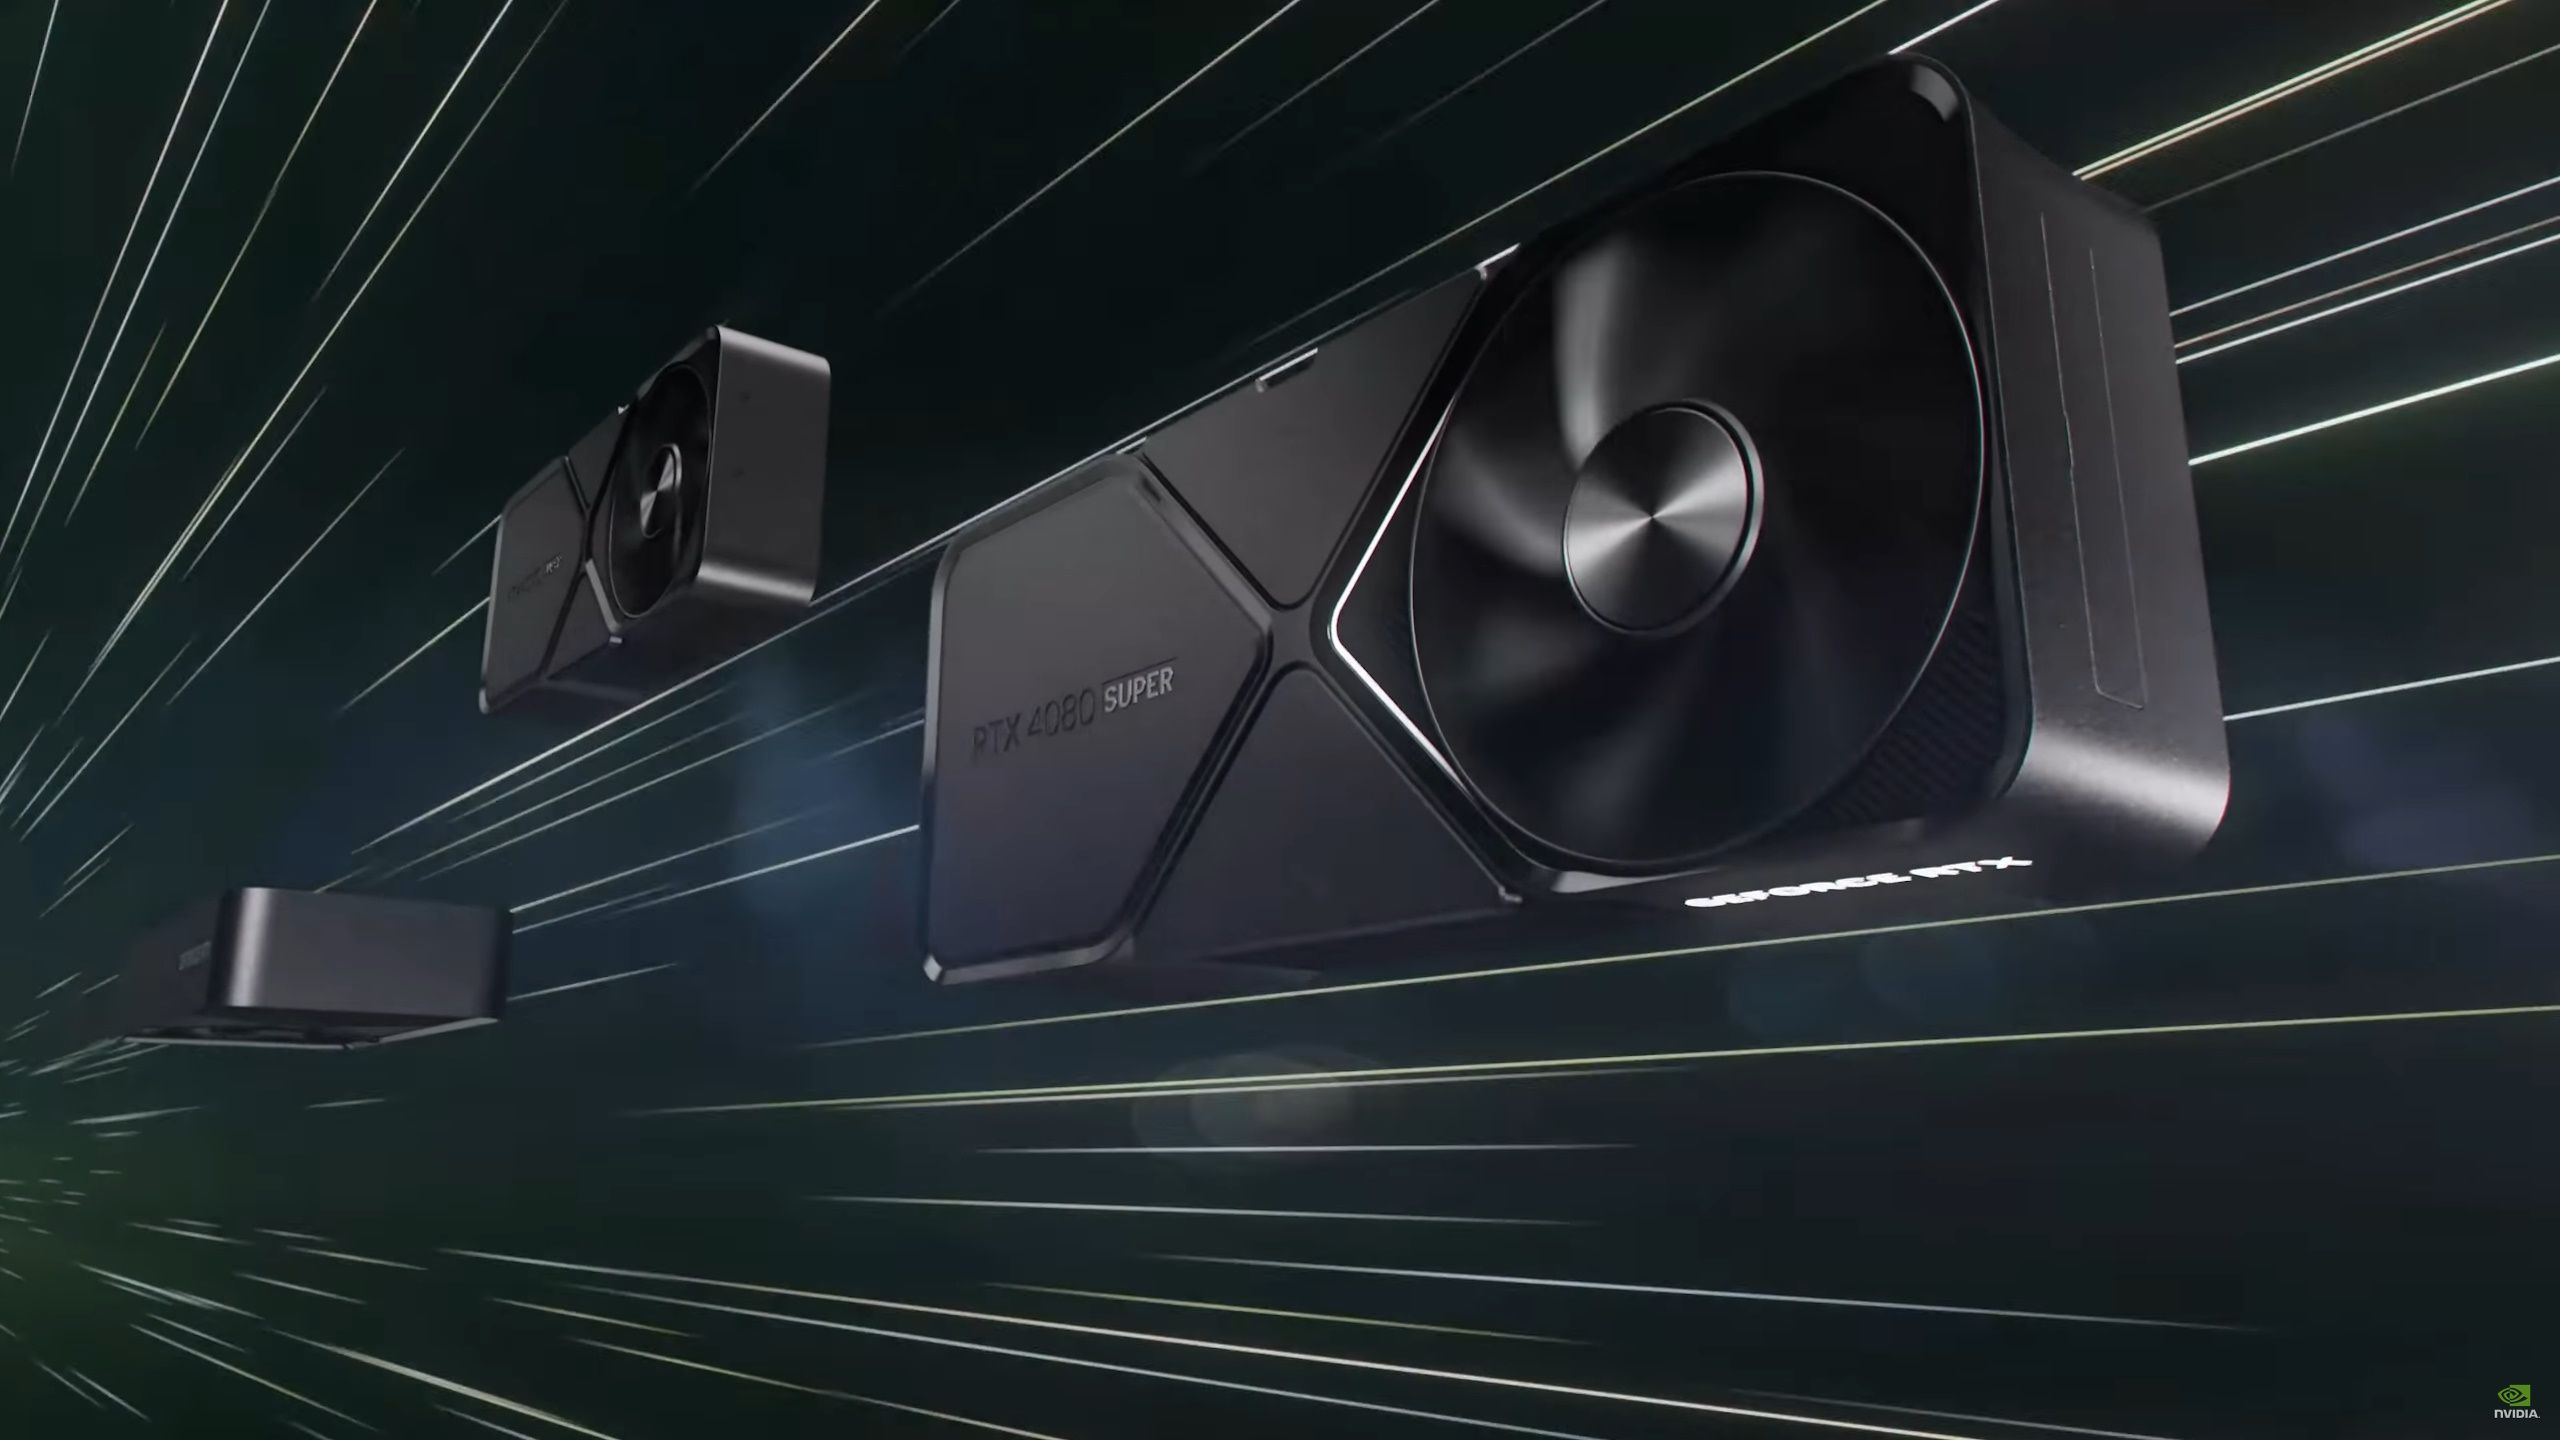 Nvidia GeForce RTX 40-series Super graphics cards